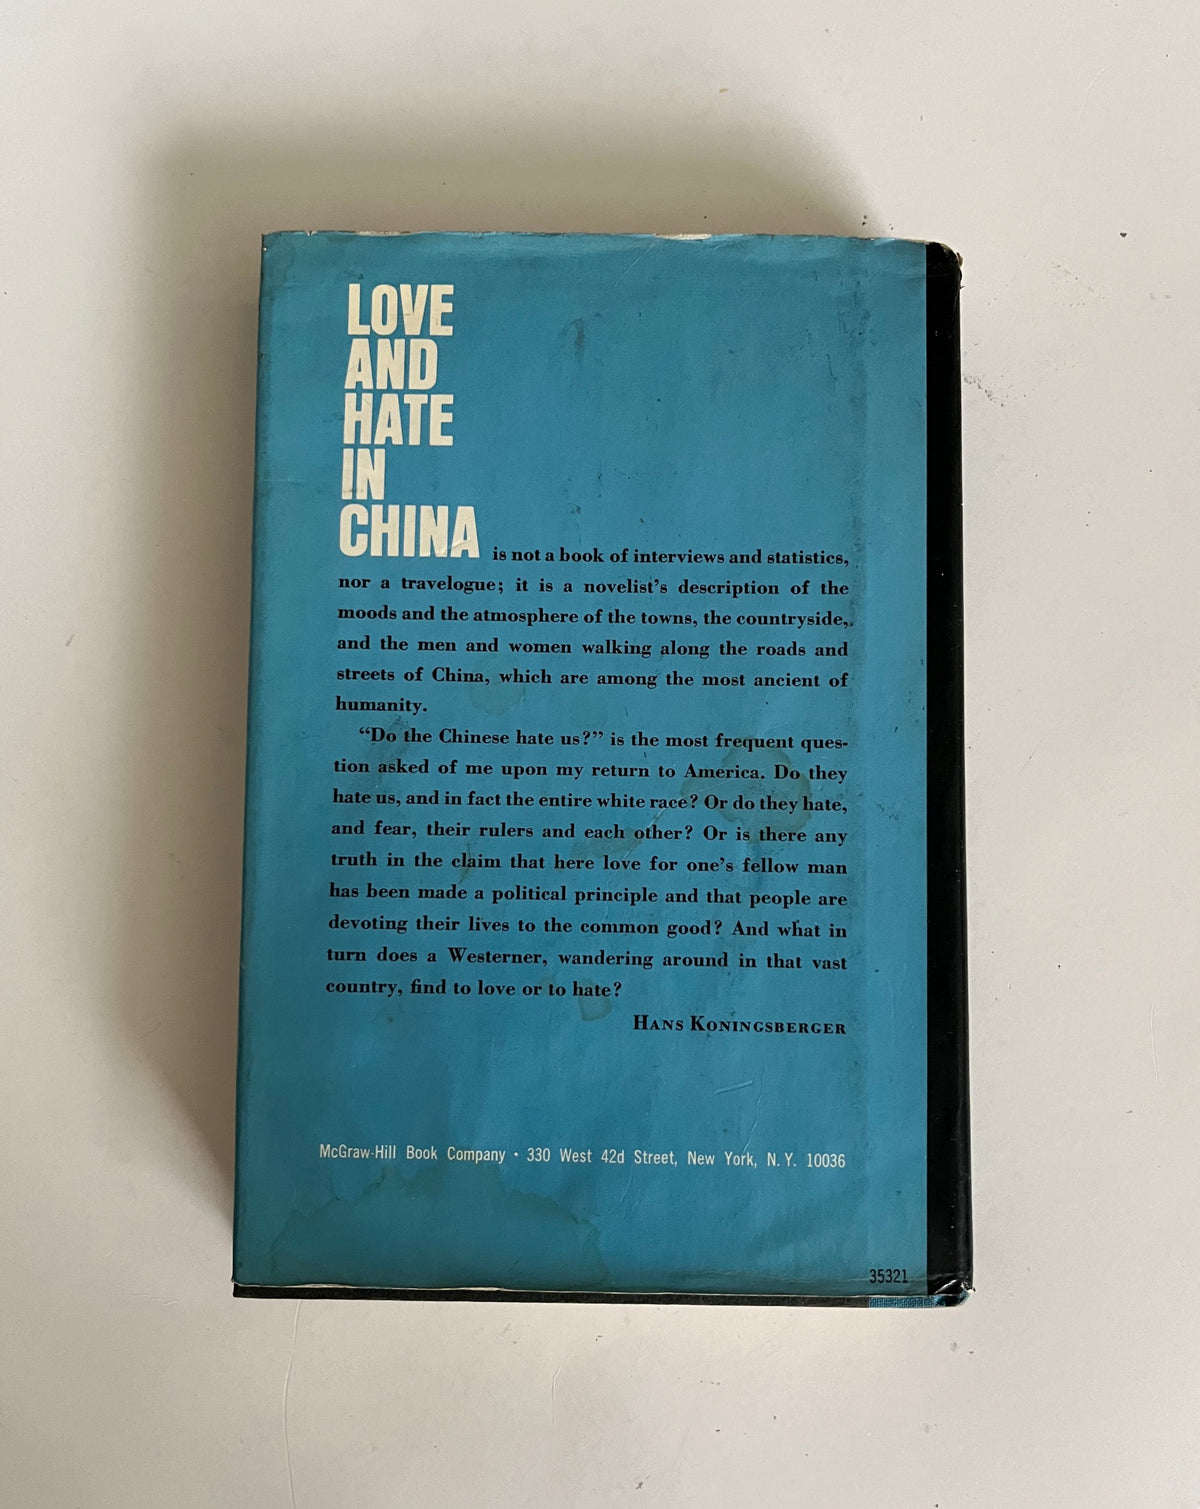 Love and Hate in China by Hans Koningsberger